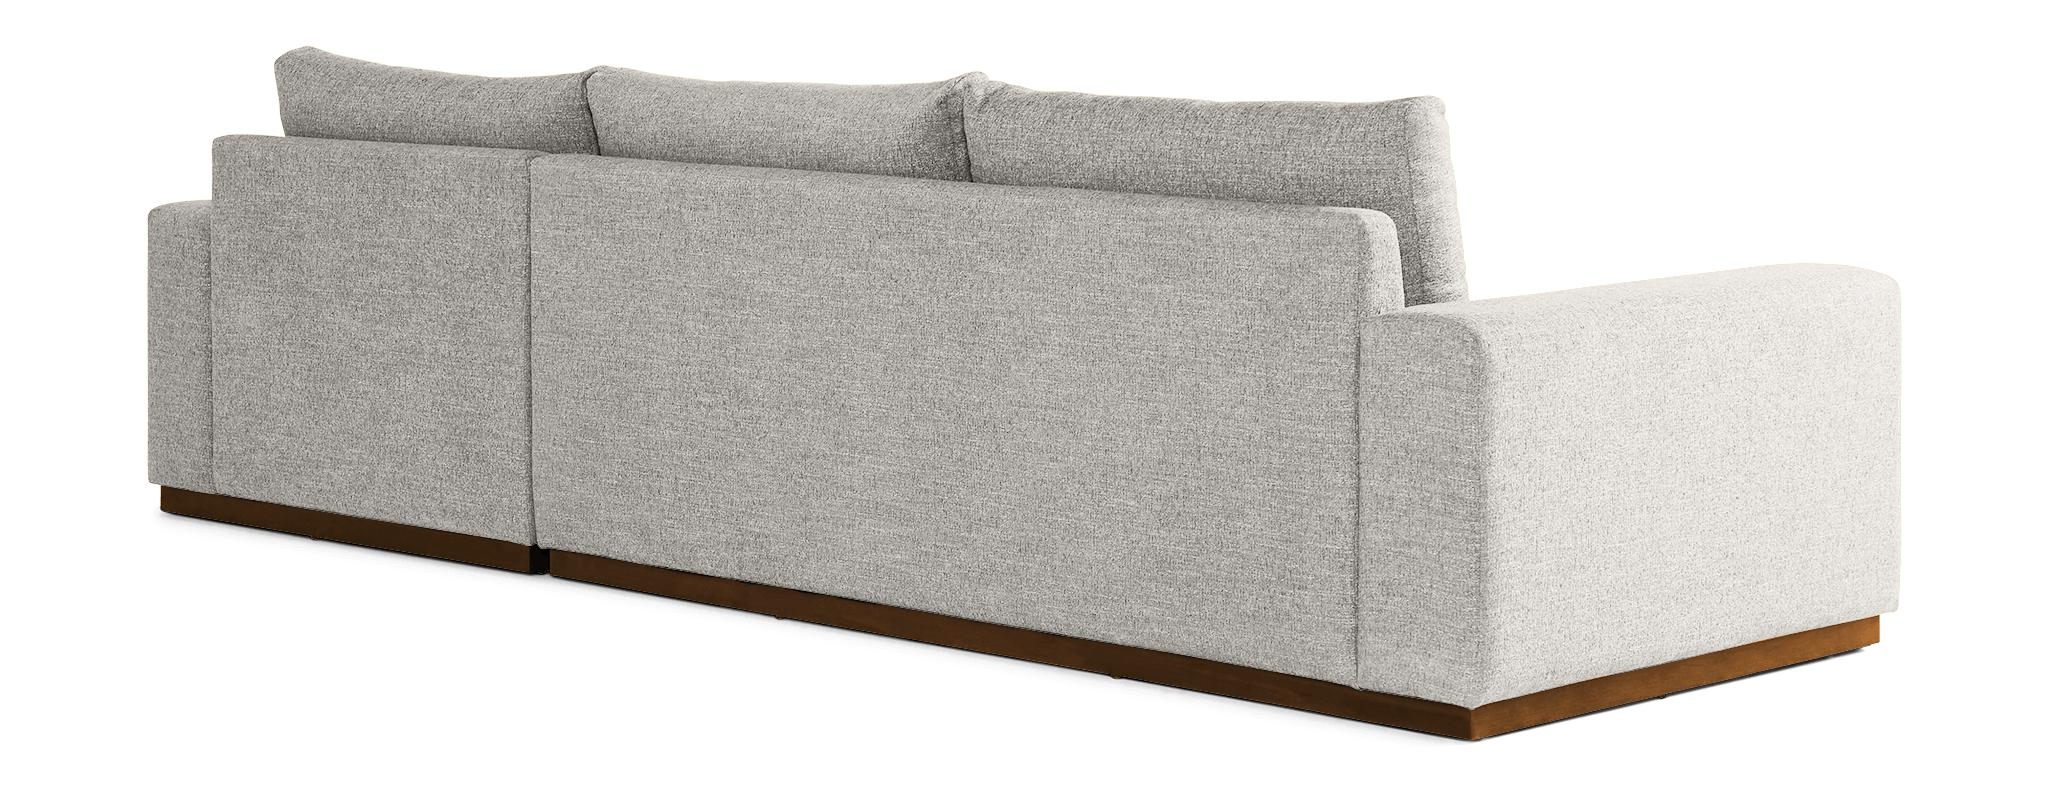 White Holt Mid Century Modern Sectional with Storage - Tussah Snow - Mocha - Left - Image 4